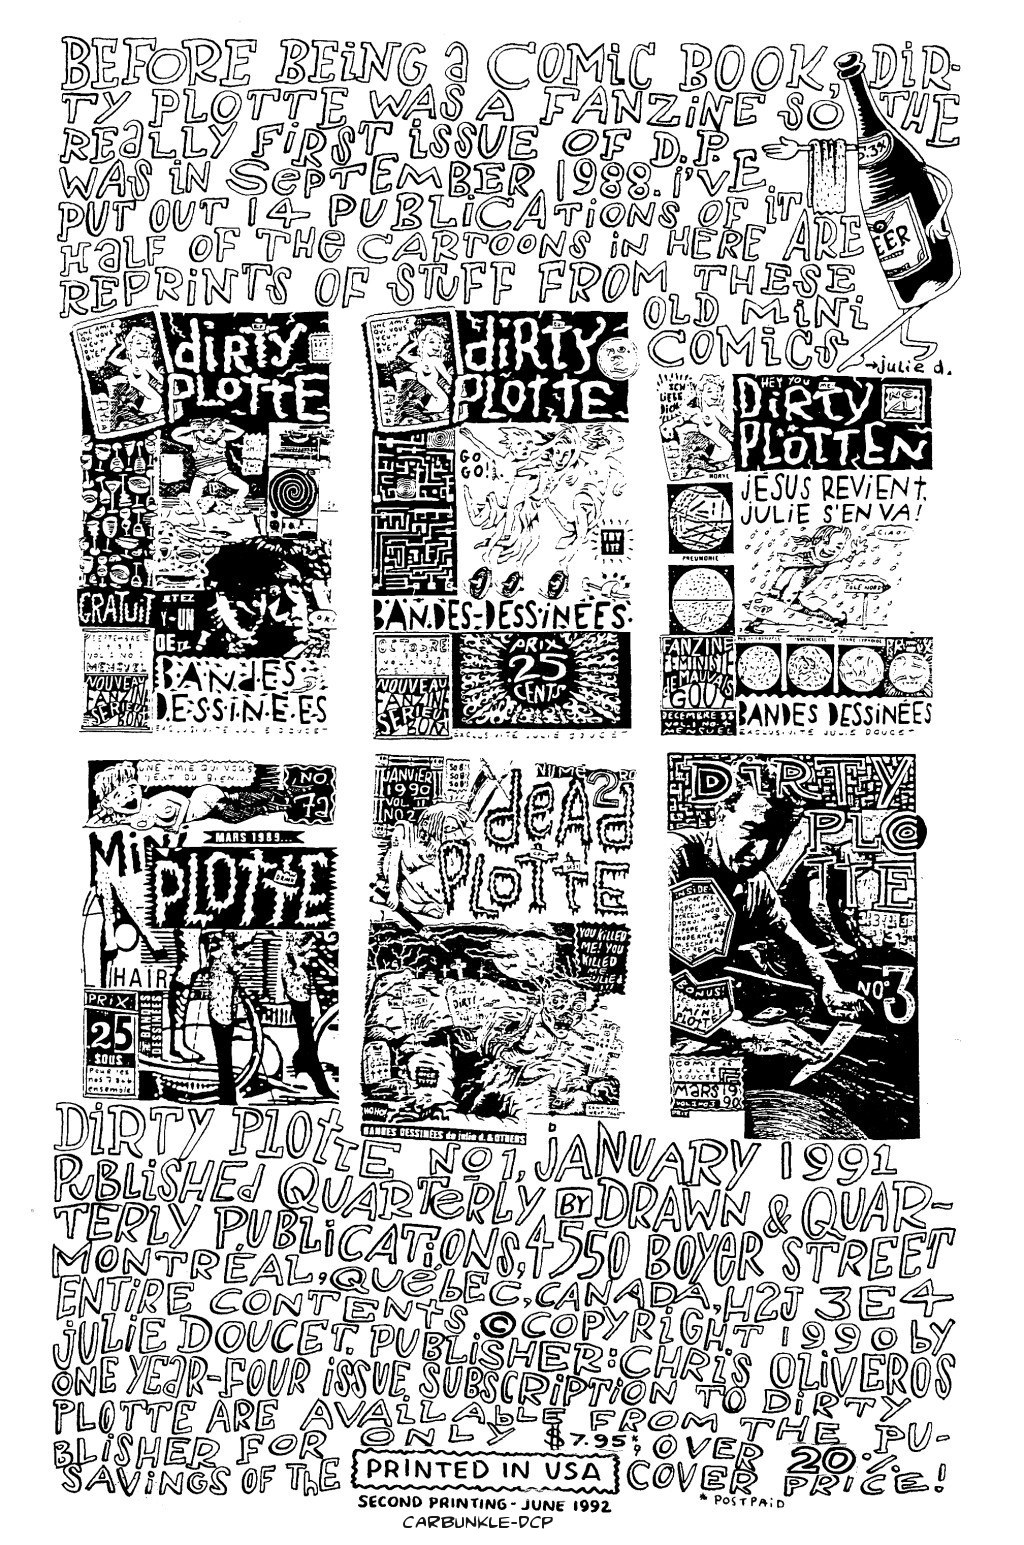 Read online Dirty Plotte comic -  Issue #1 - 2